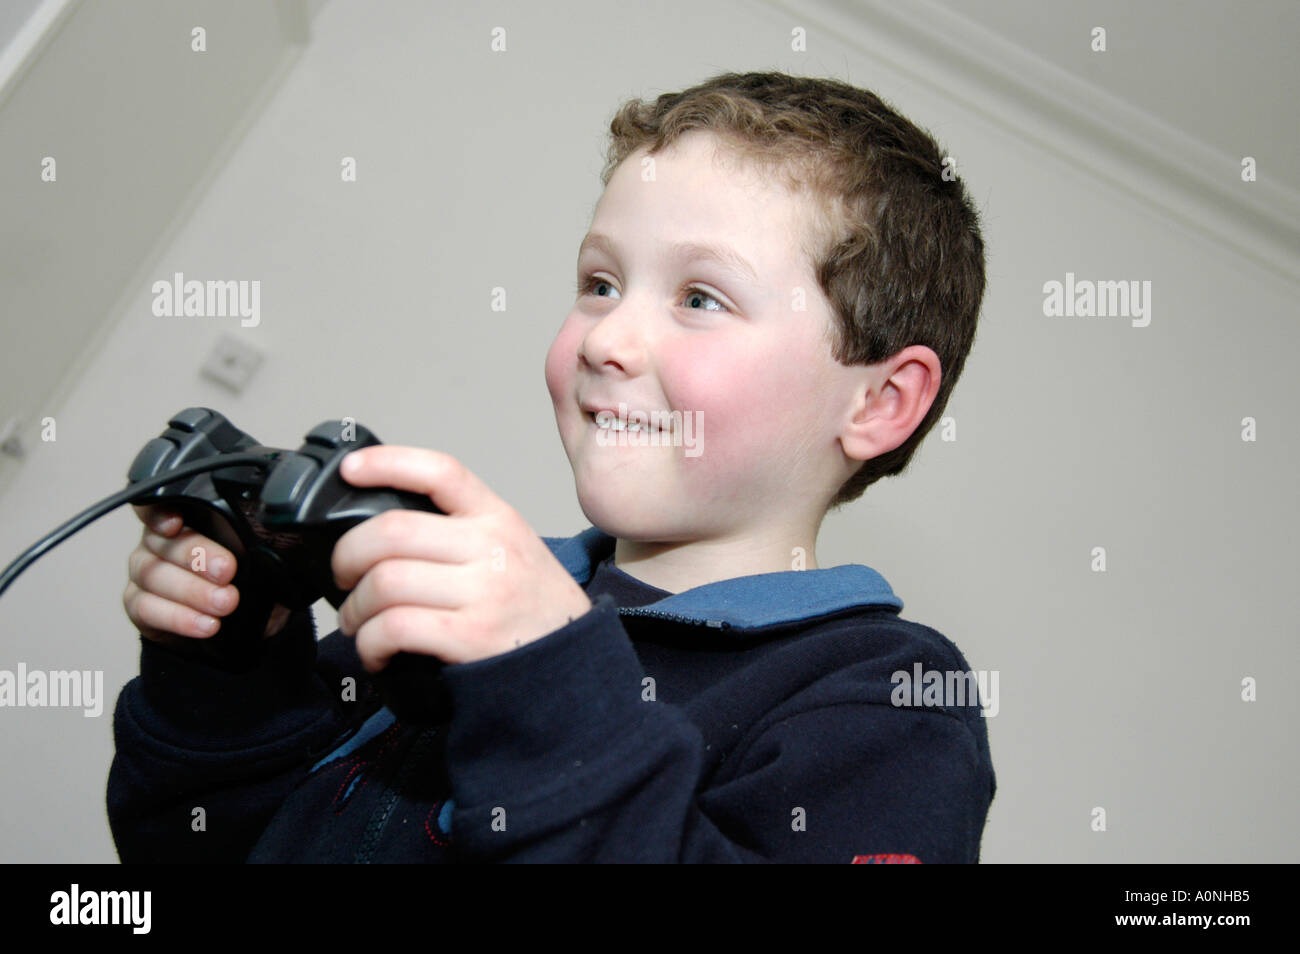 Small boy of 6 playing computer game on Sony Playstation console, England, UK Stock Photo